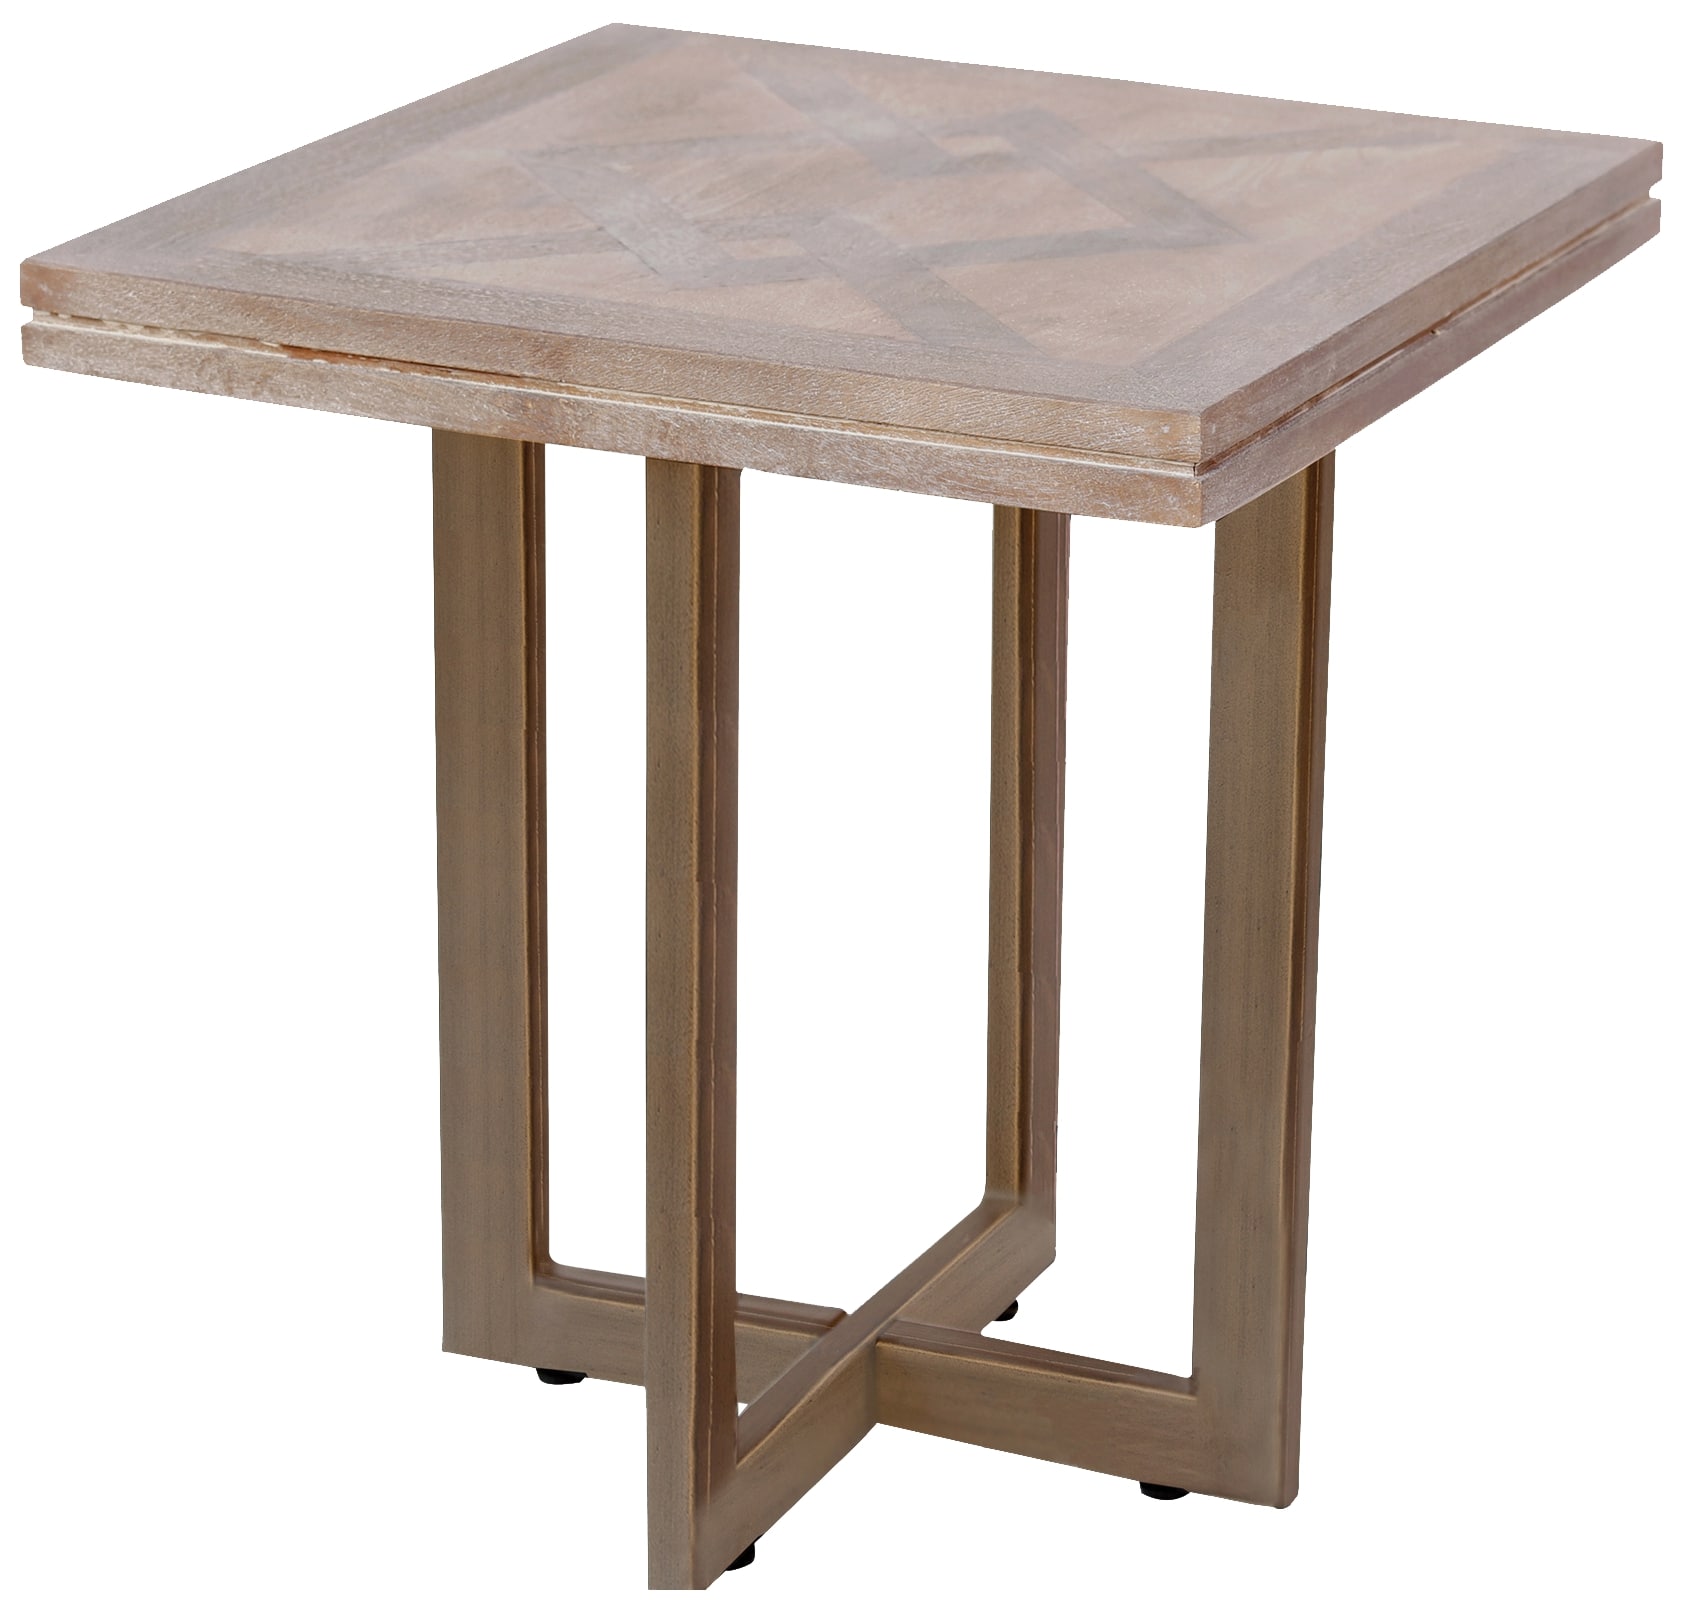 22" x 22" x 24" Wood Cream and Gold Contemporary End Table